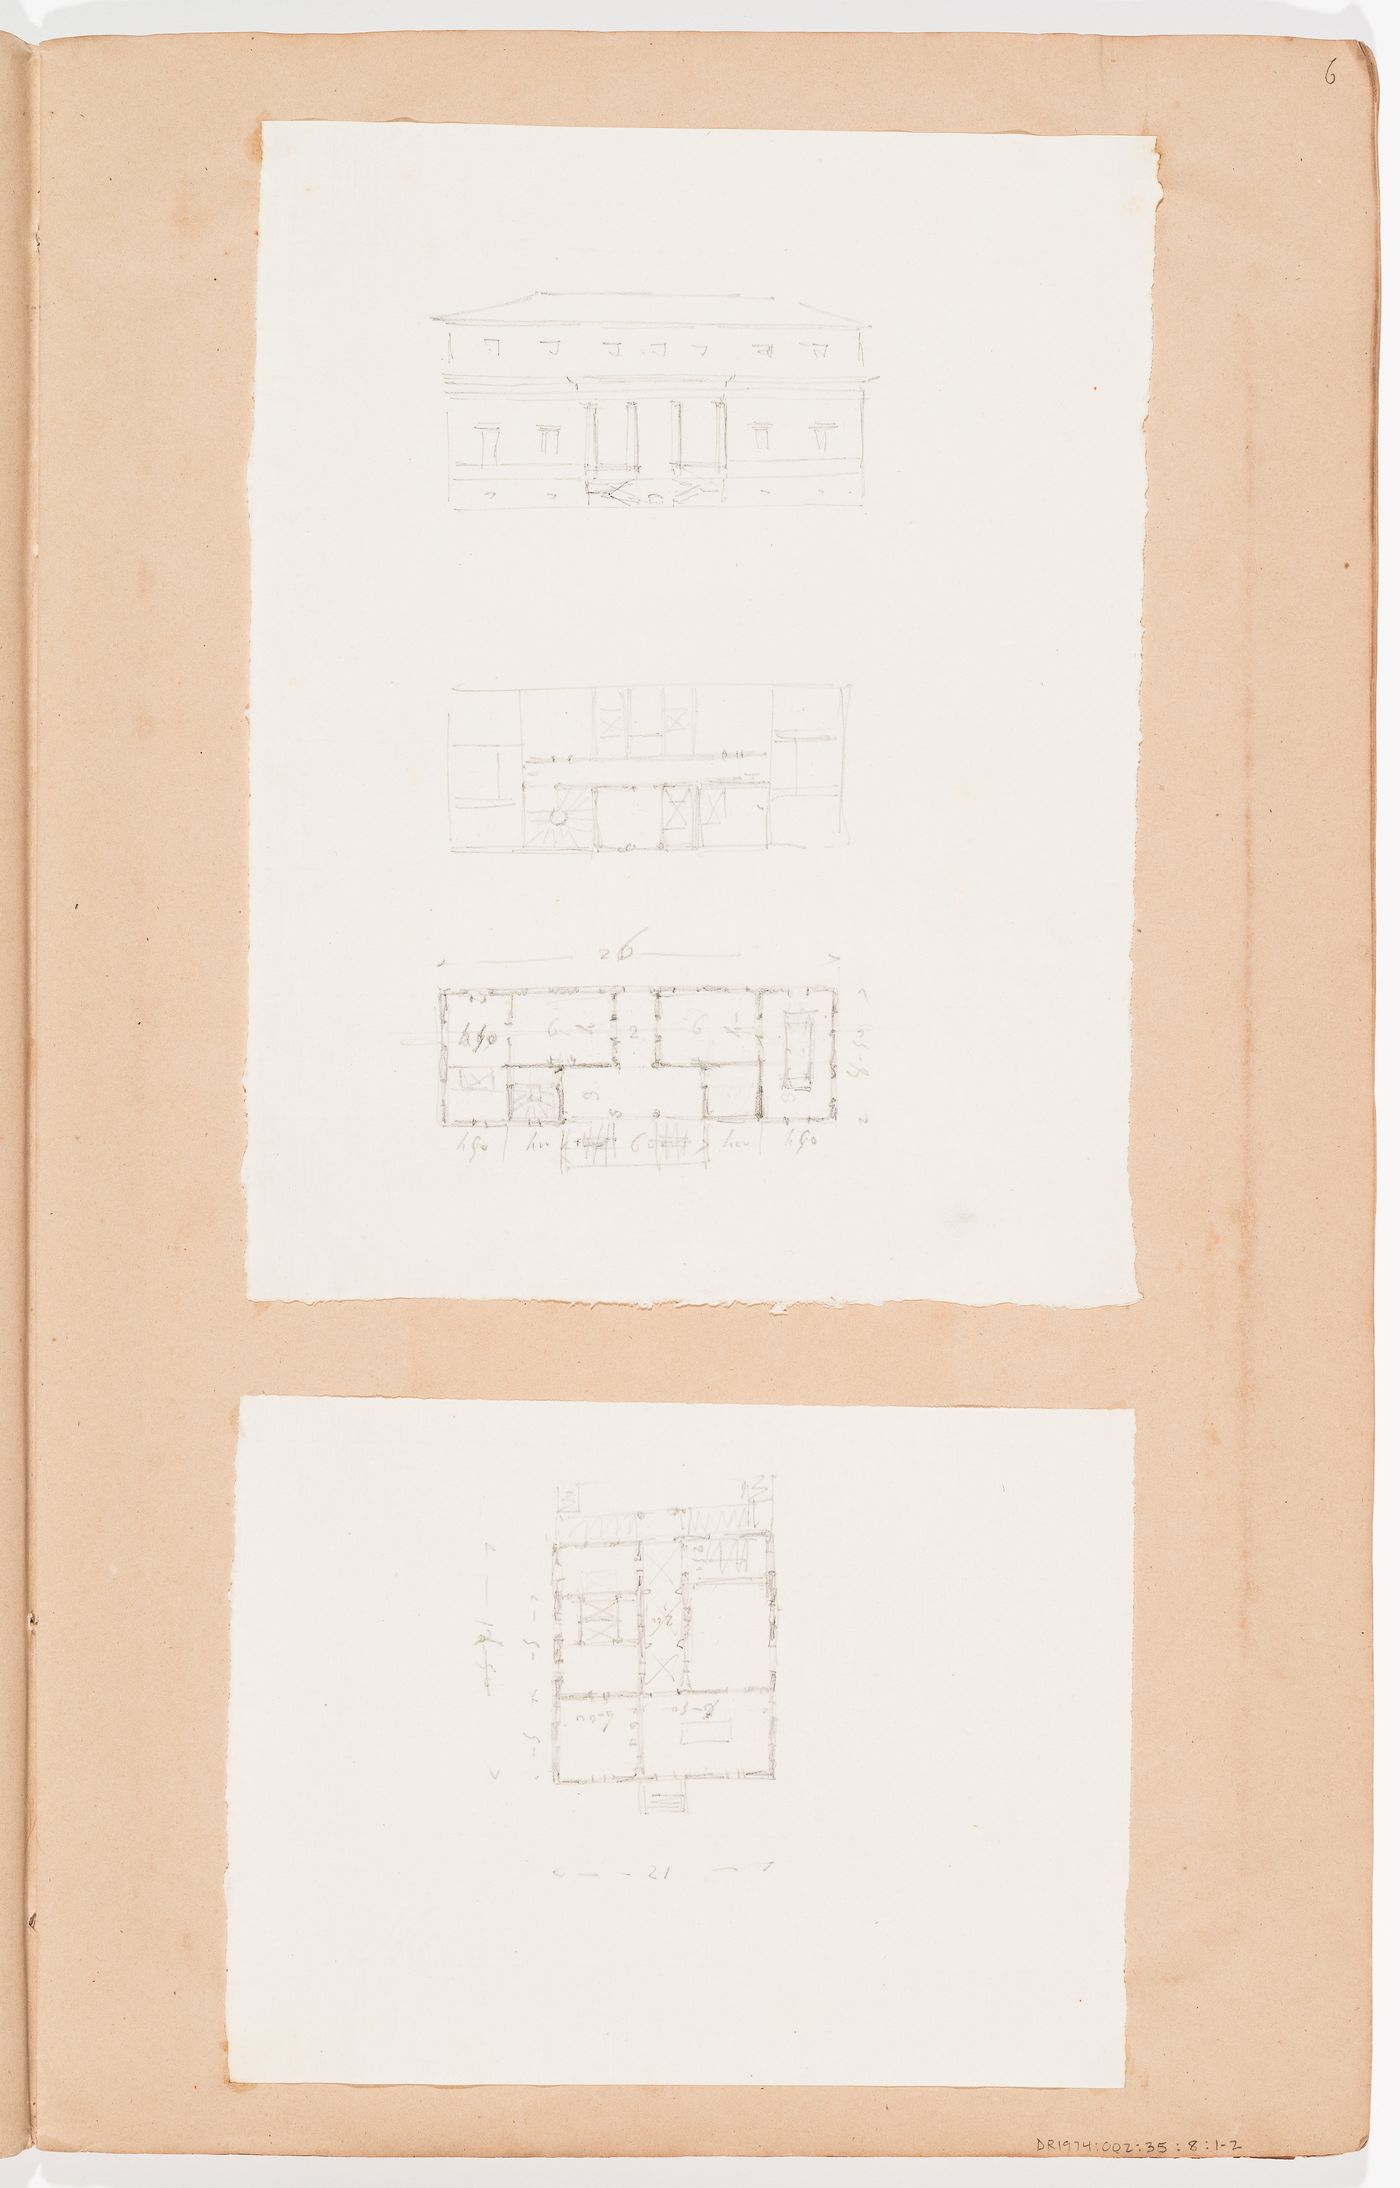 Sketch elevation and plans for unidentified houses